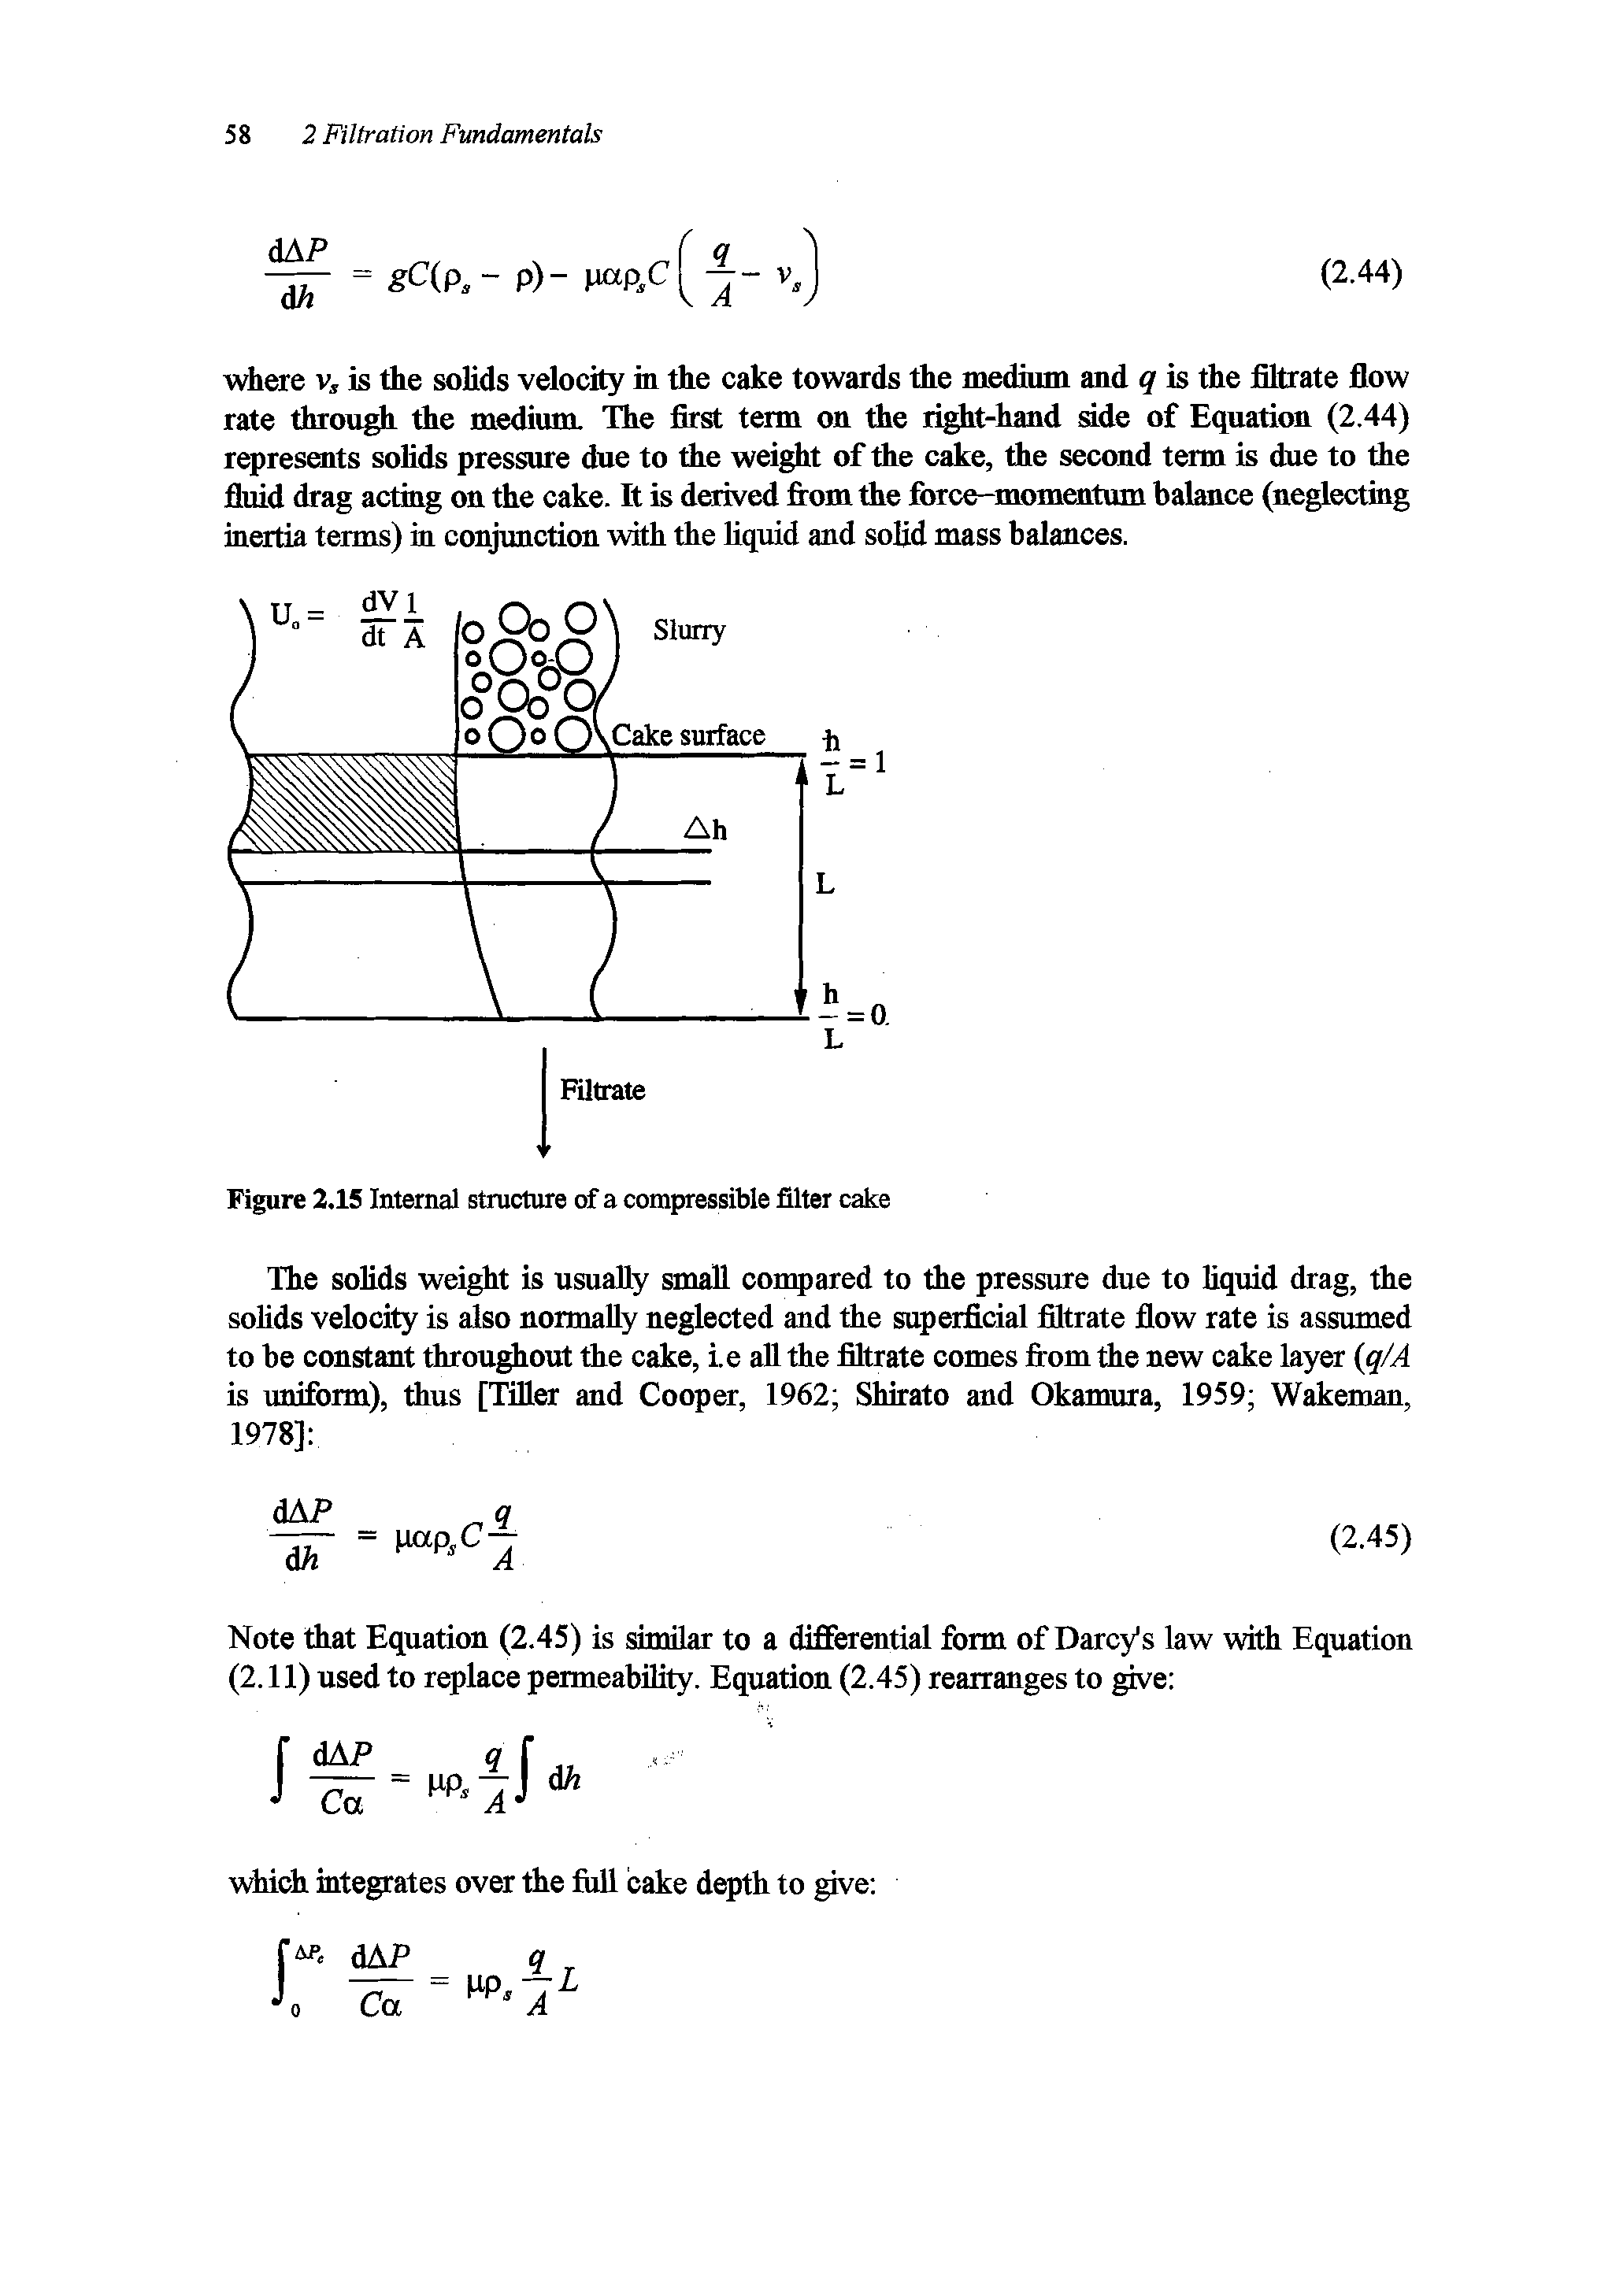 Figure 2.15 Internal structure of a compressible filter cake...